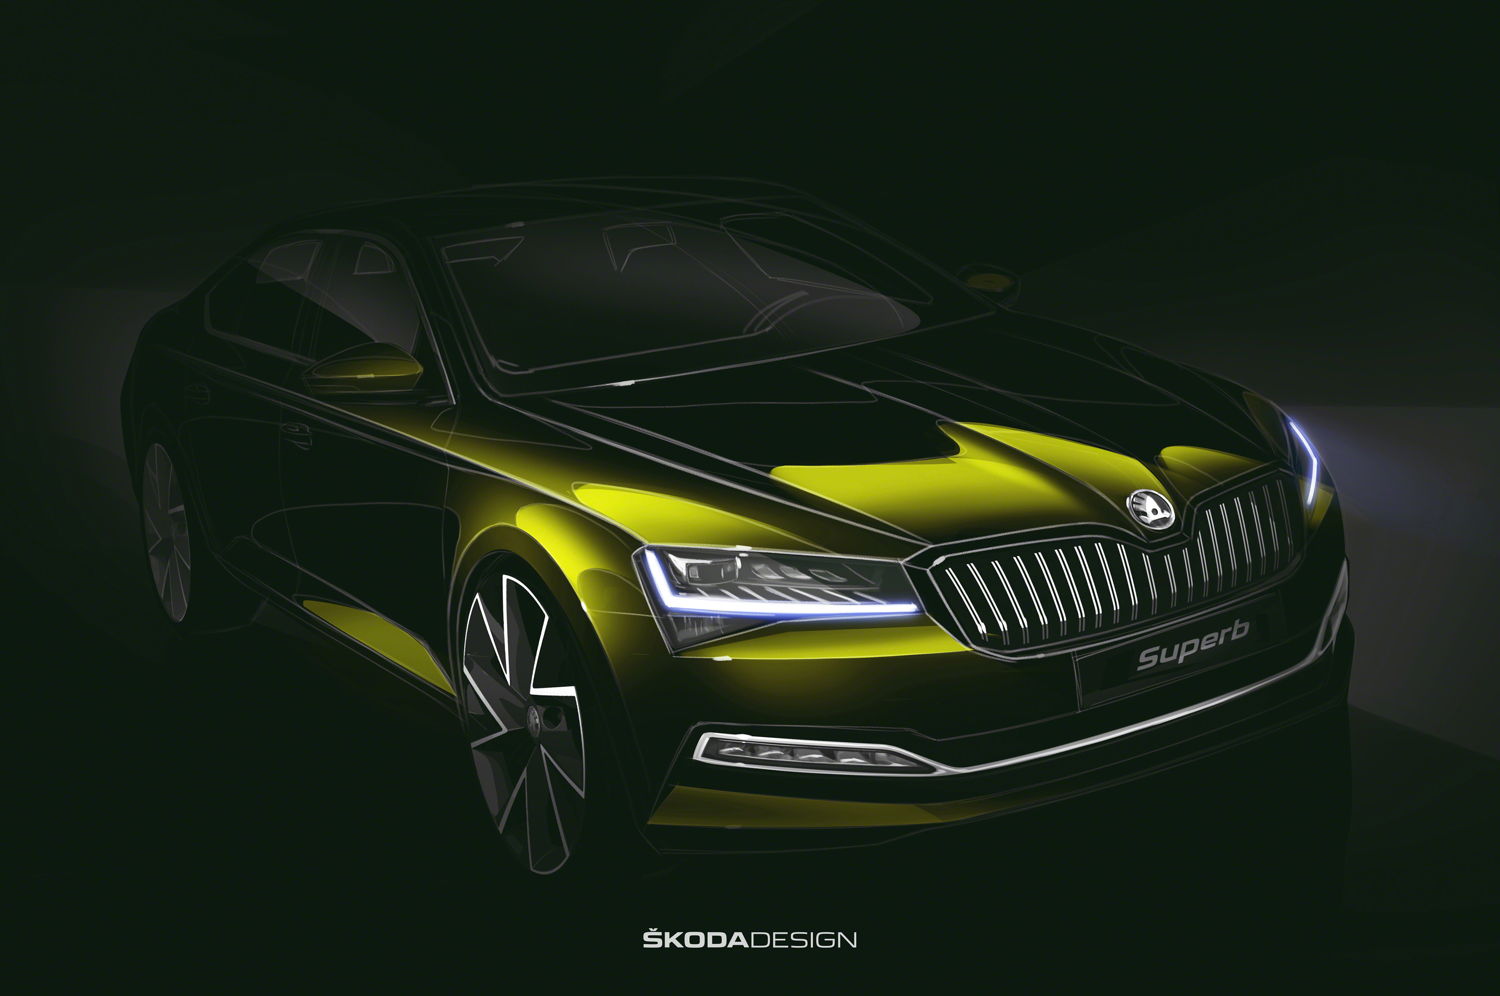 The reworked version of the ŠKODA SUPERB features clean-cut headlights with crystalline details as well as fog lights with a distinctive trim.